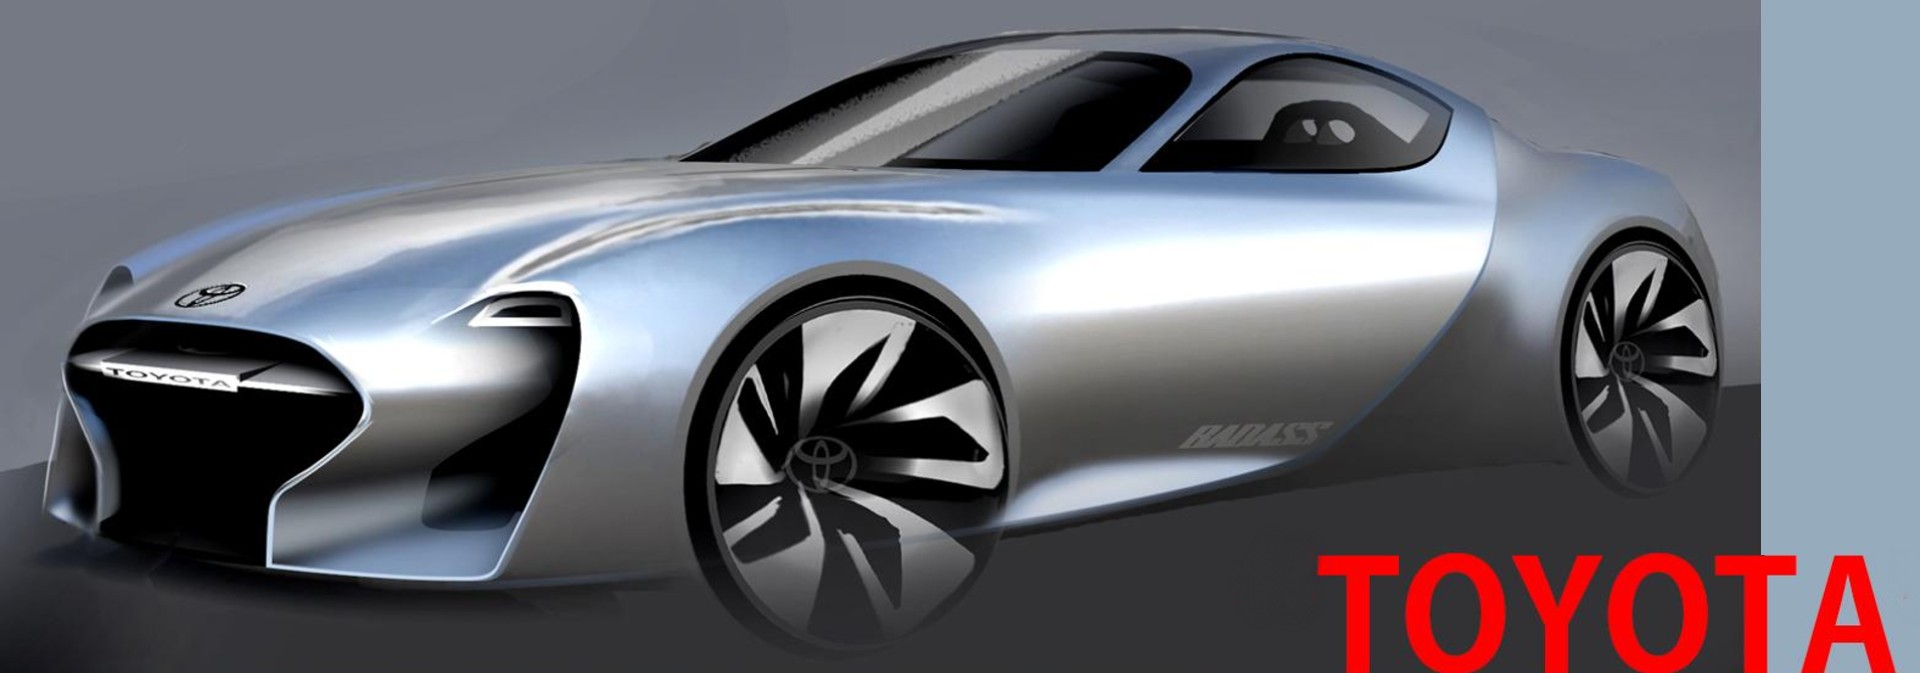 Toyota-GR-Supra-Early-Sketches-7.jpg